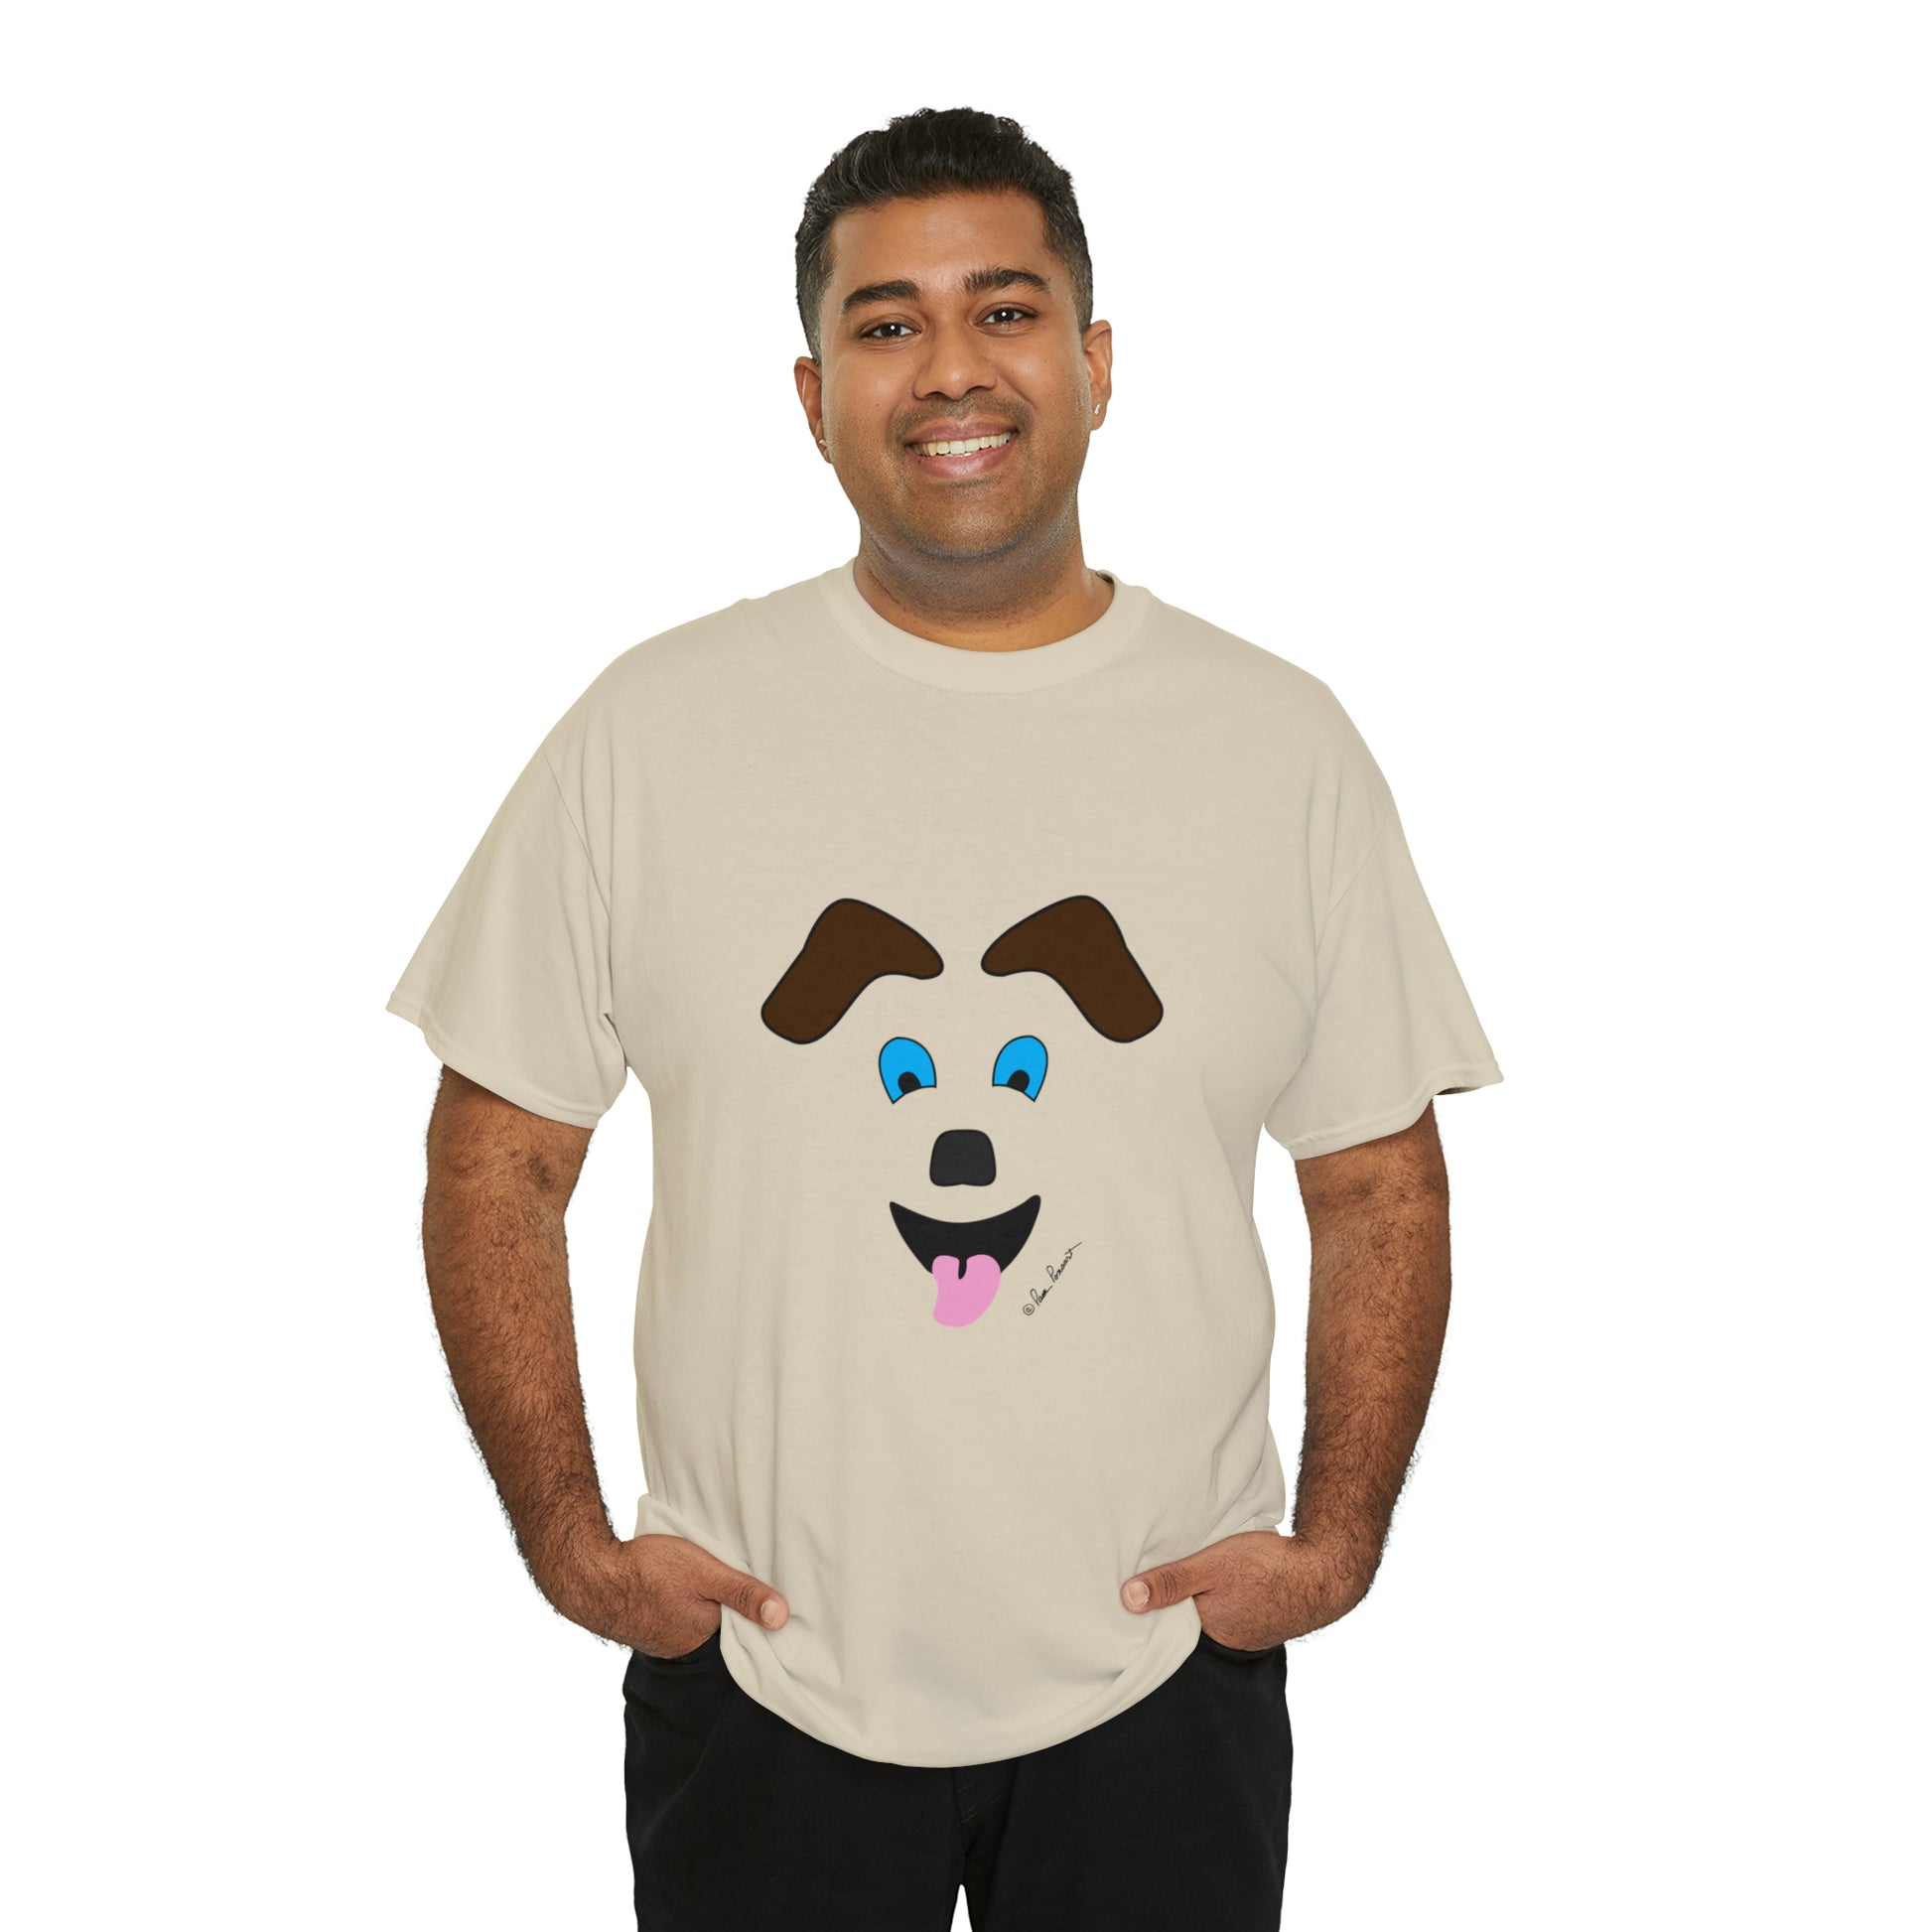 Mock up of a happy man wearing the Sand shirt